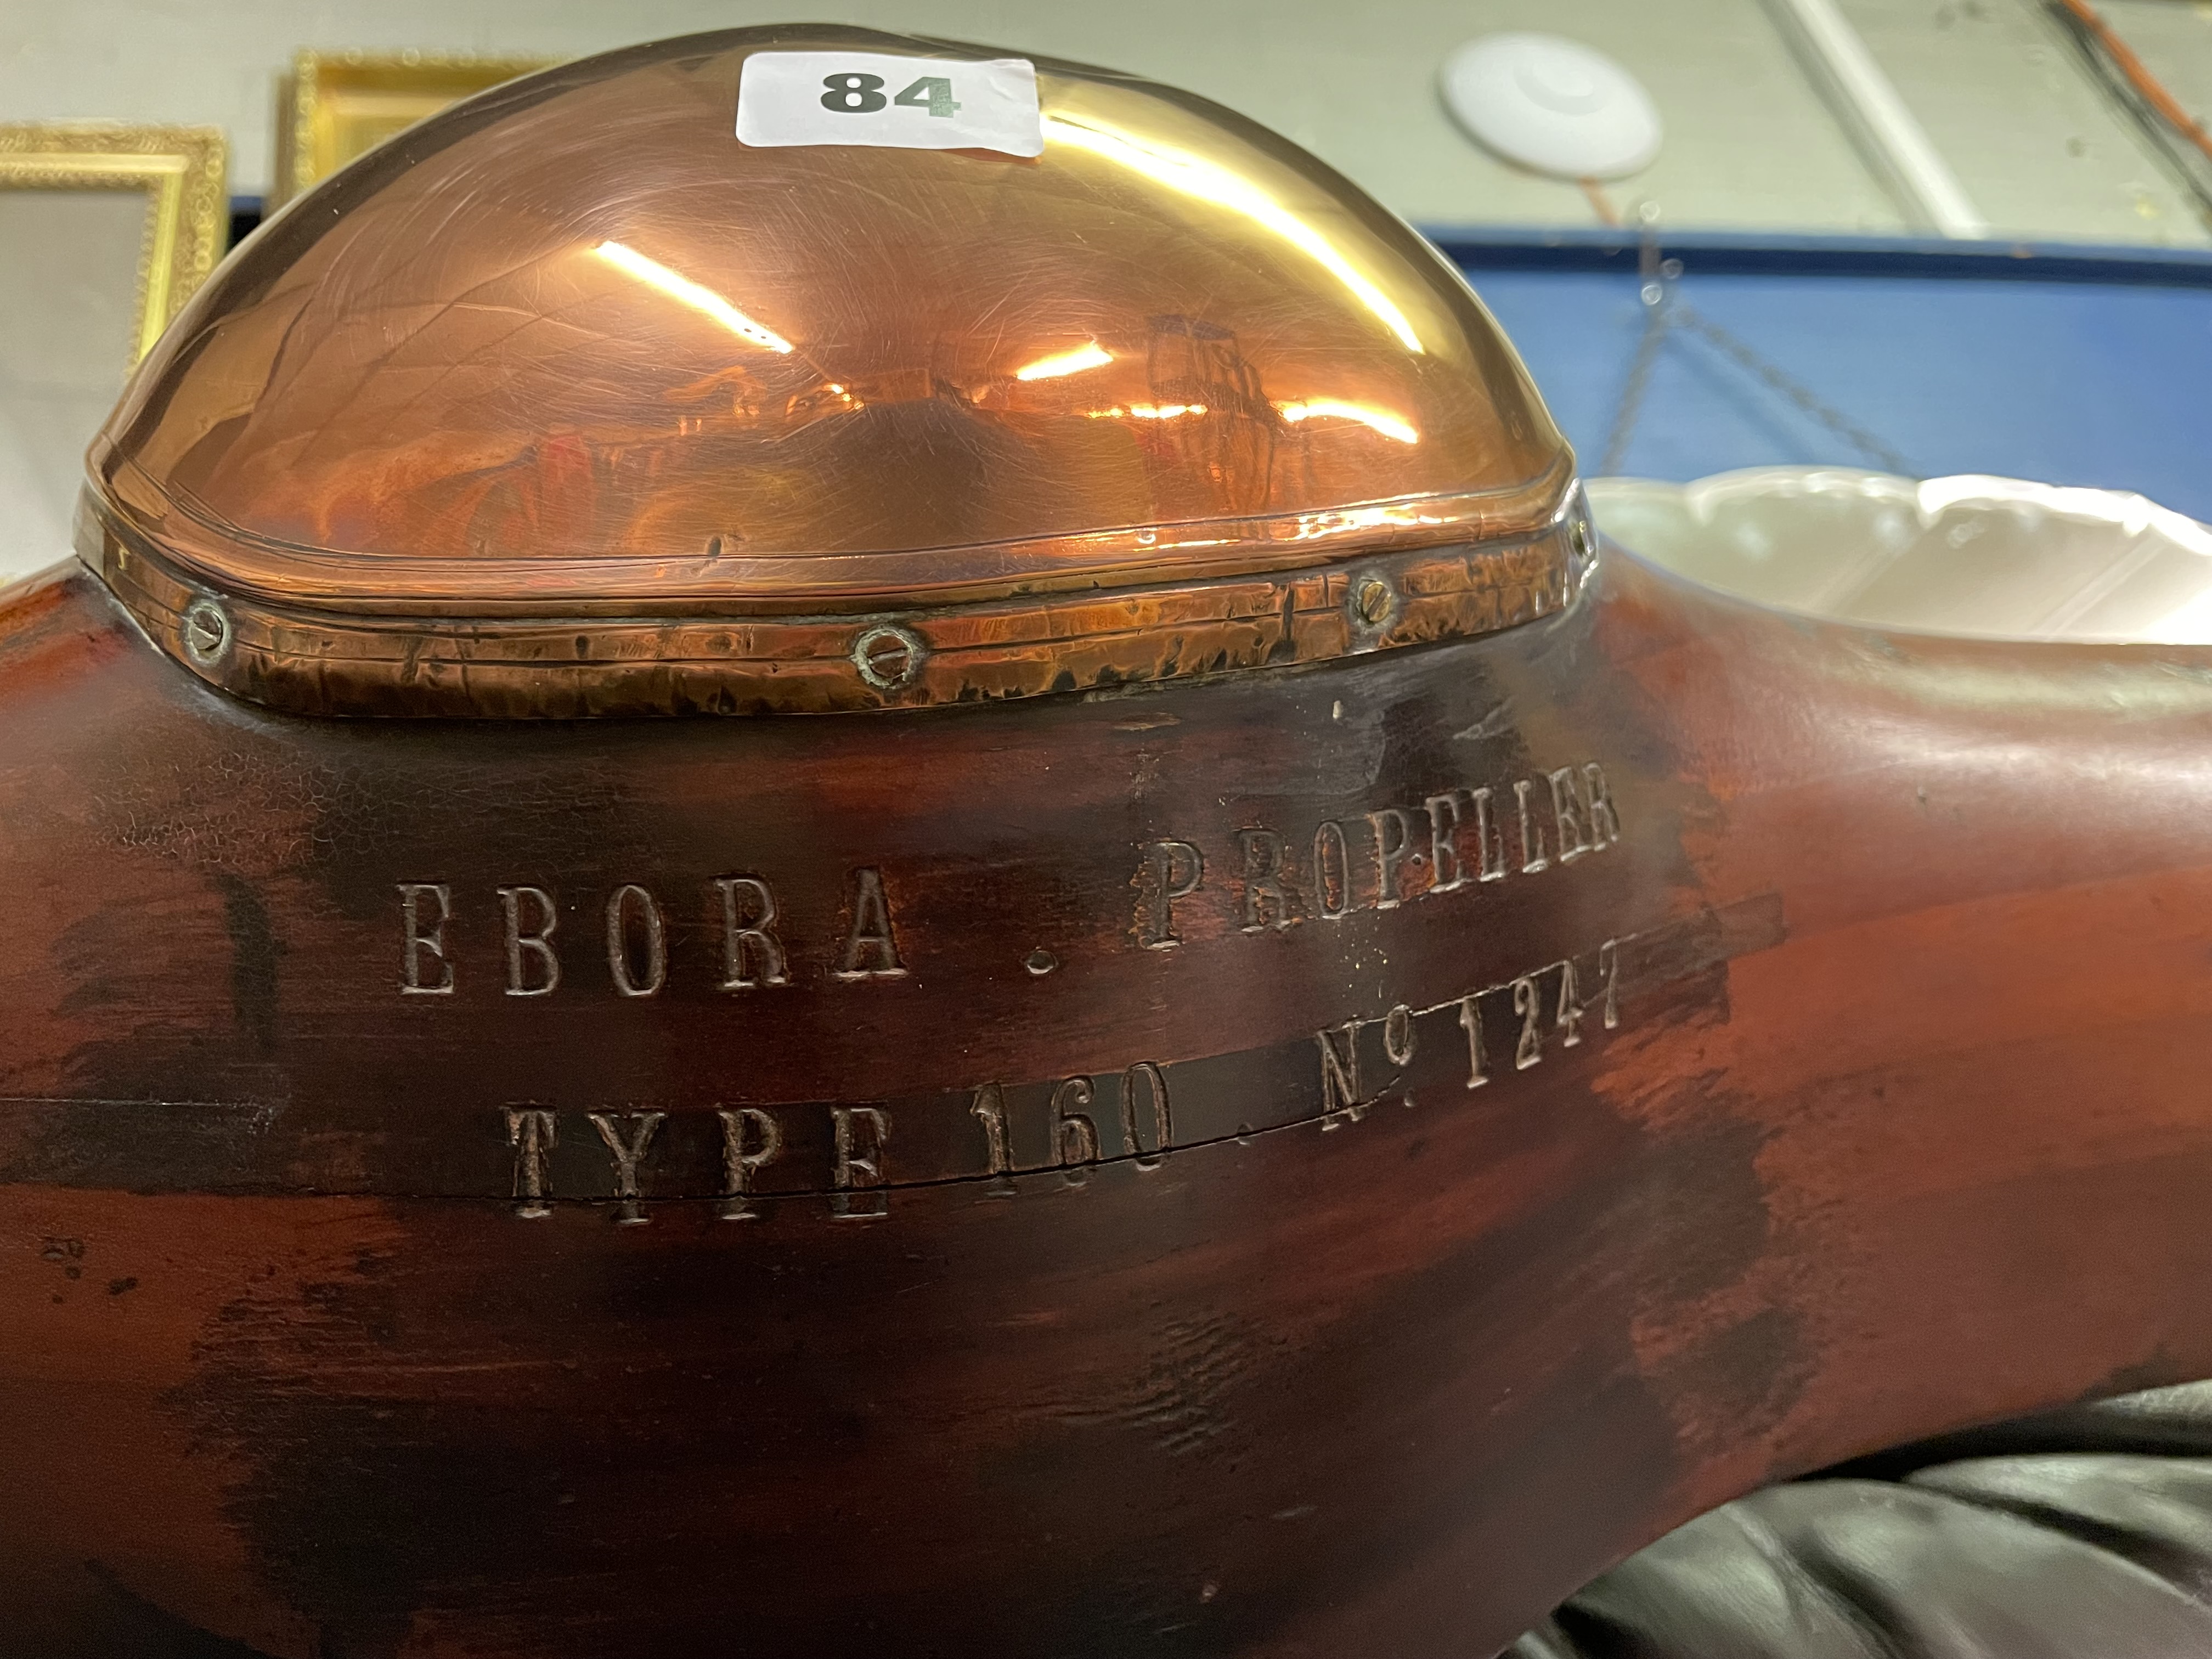 EBORA PROPELLER TYPE 160 NUMBER 1247 PRESENTED TO ROYAL AIRFORCES CLUB COVENTRY BY H.A.GILBY A.M.S. - Image 4 of 11